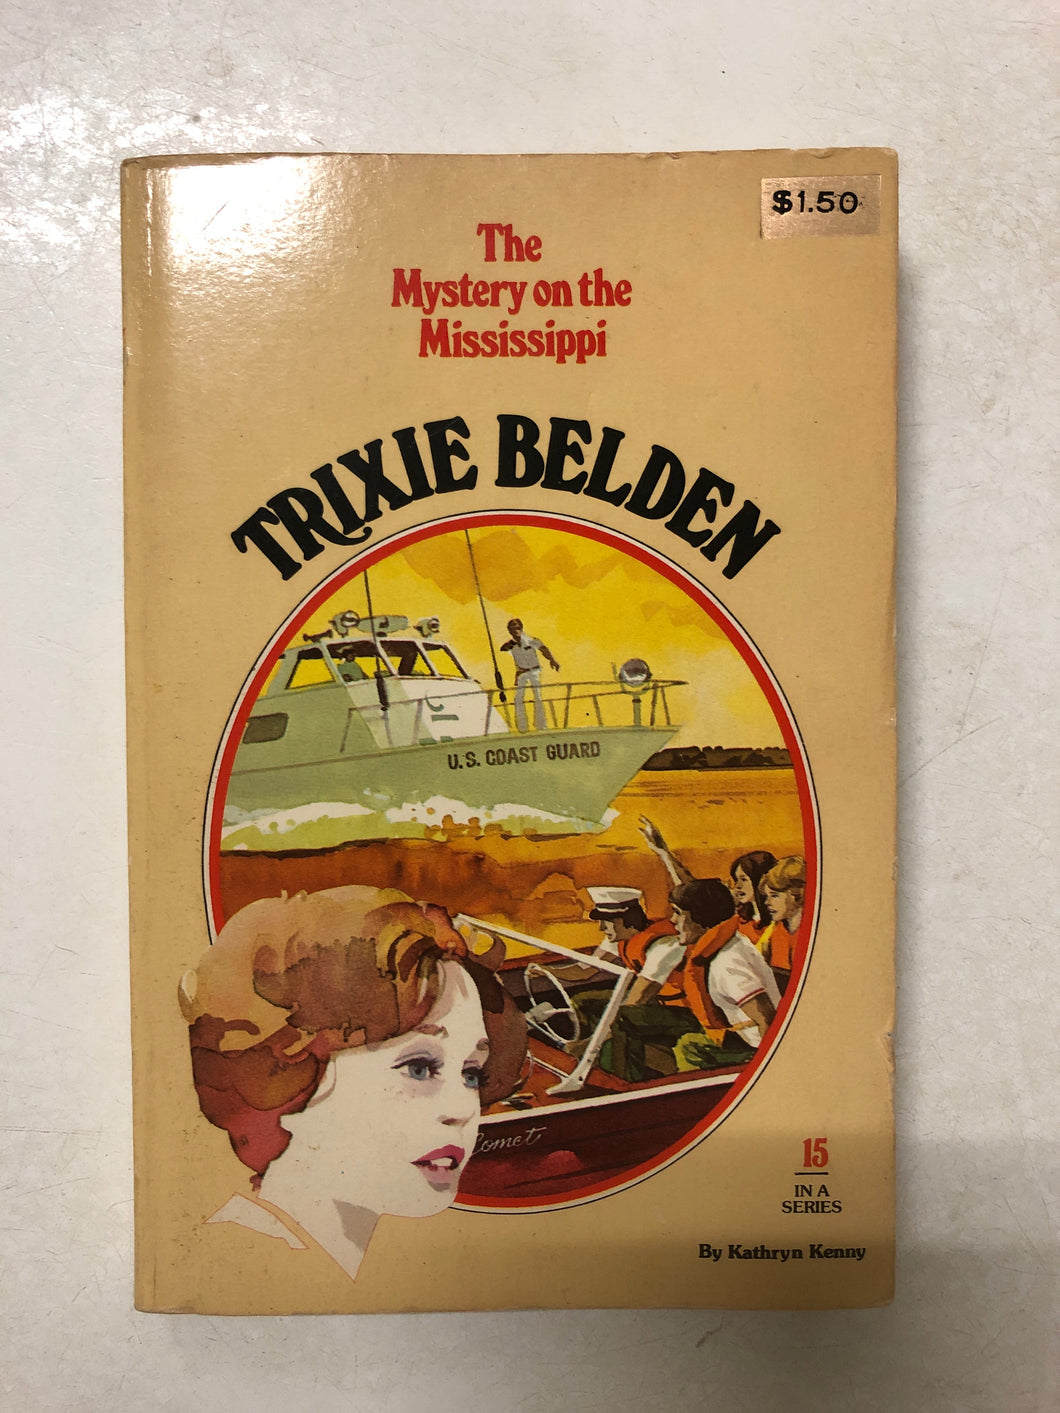 Trixie Belden and the Mystery on the Mississippi - Slick Cat Books 